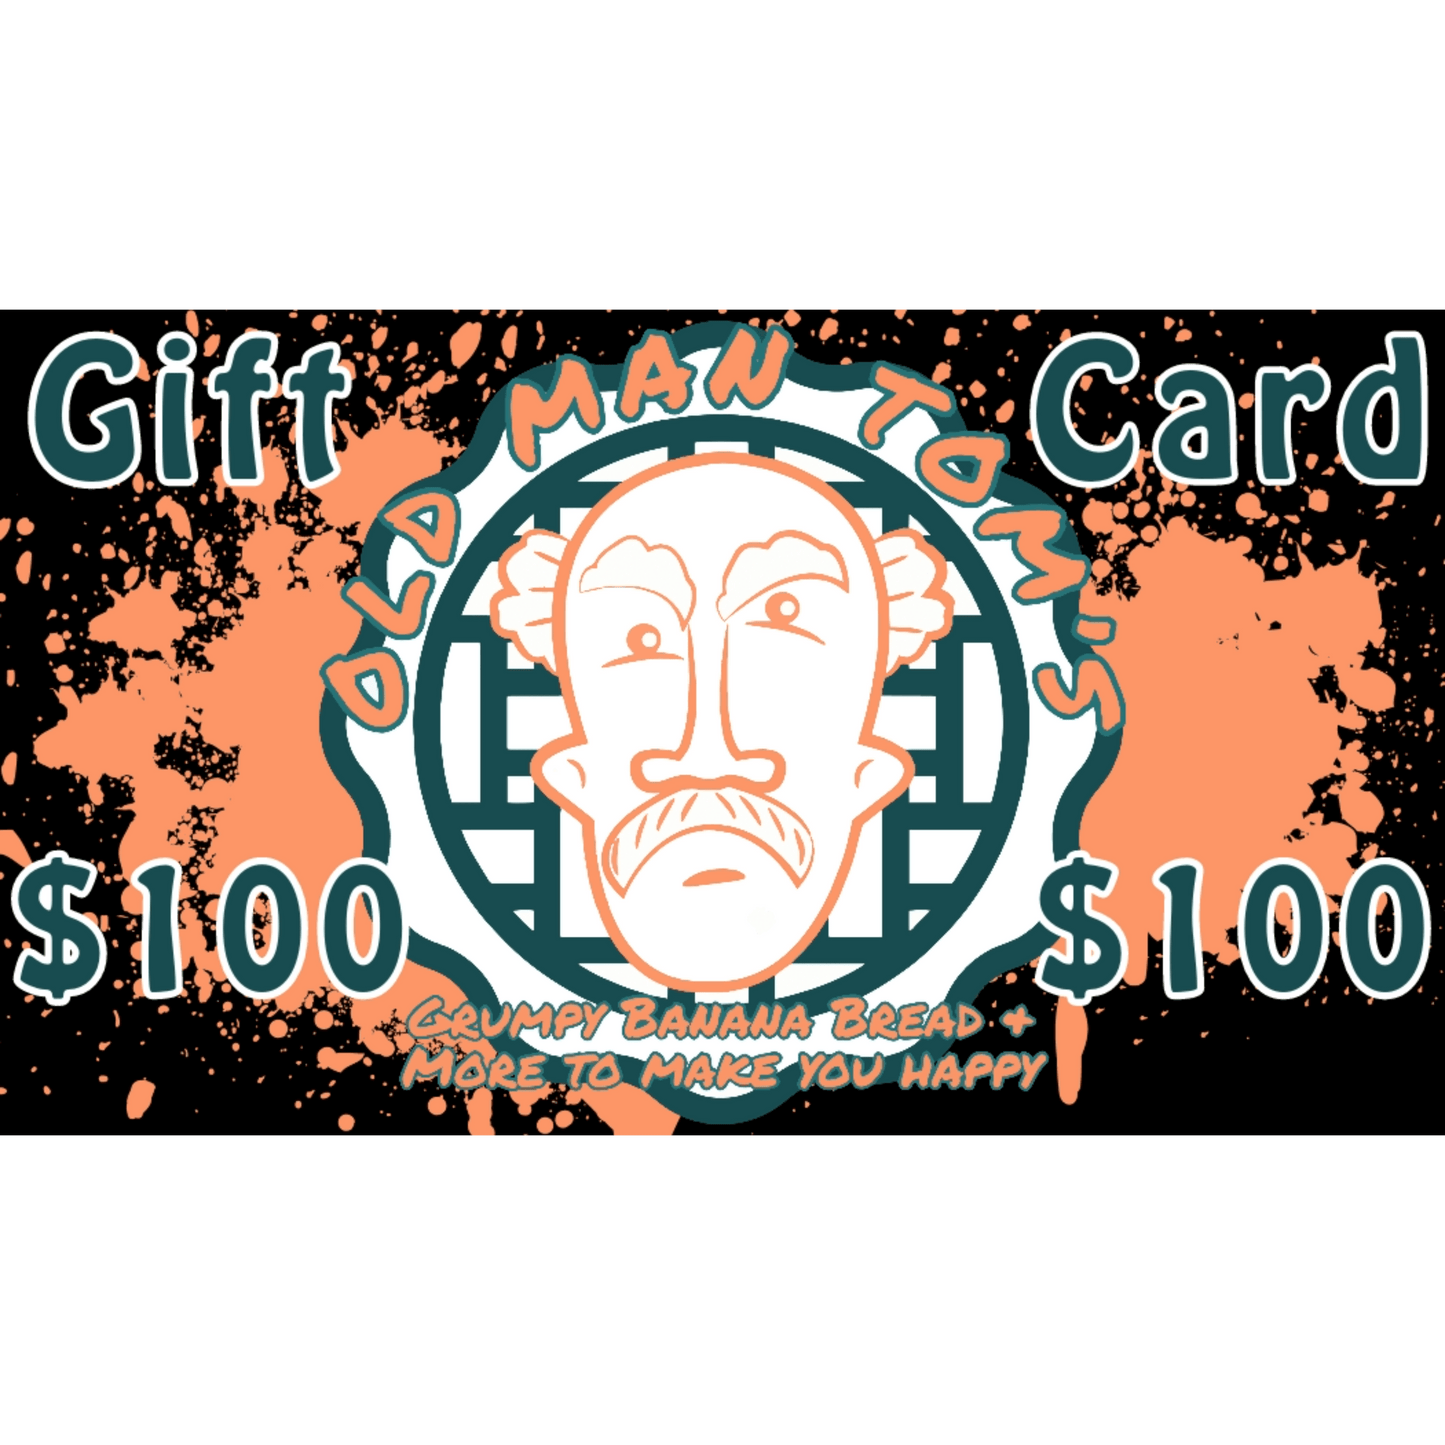 Old Man Toms Gift Cards